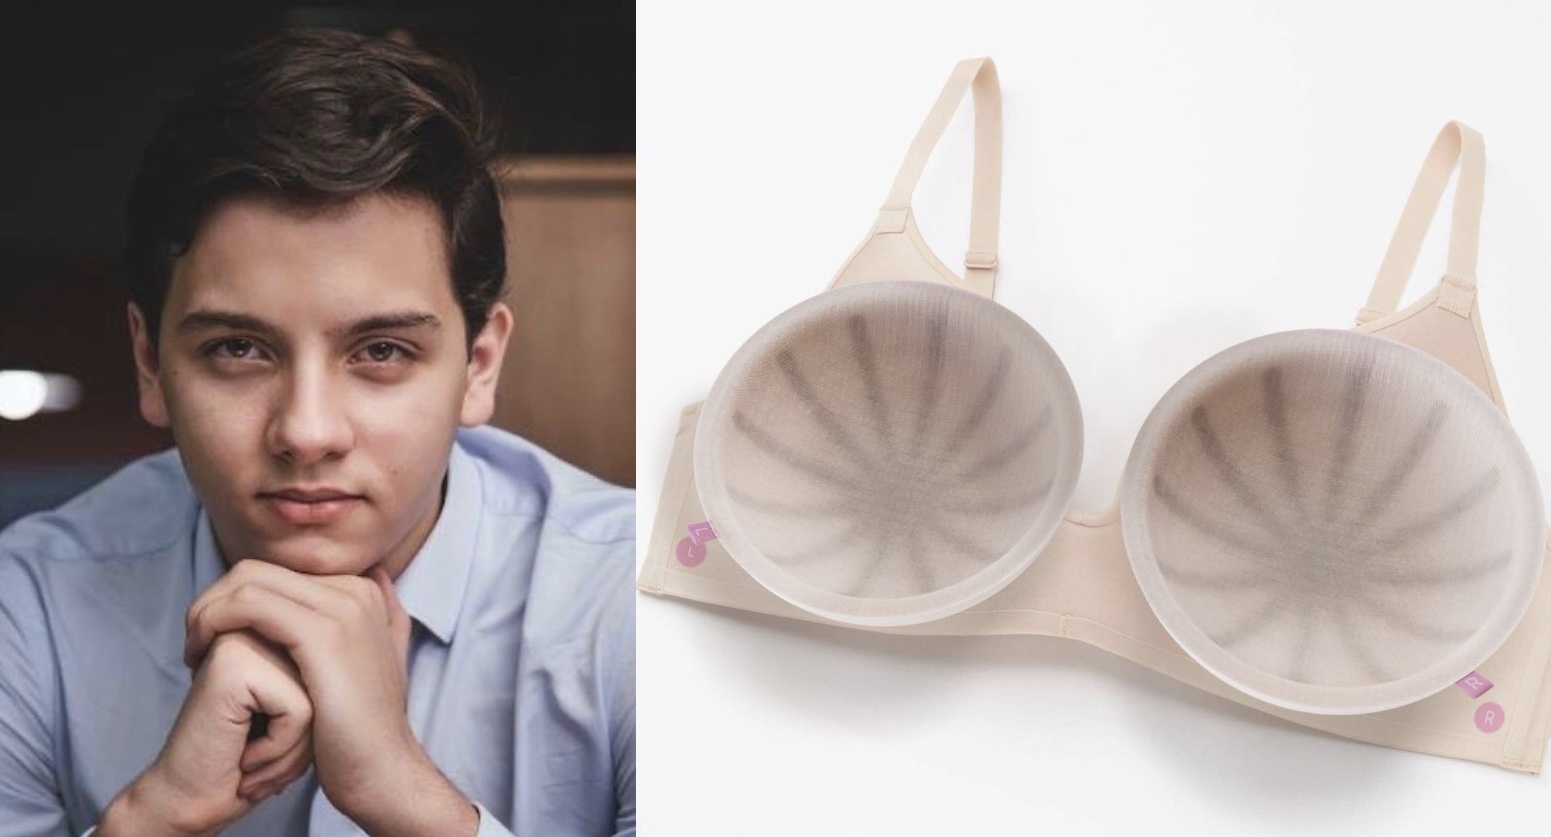 Meet the teenage son who invented a smart bra after his Mom's